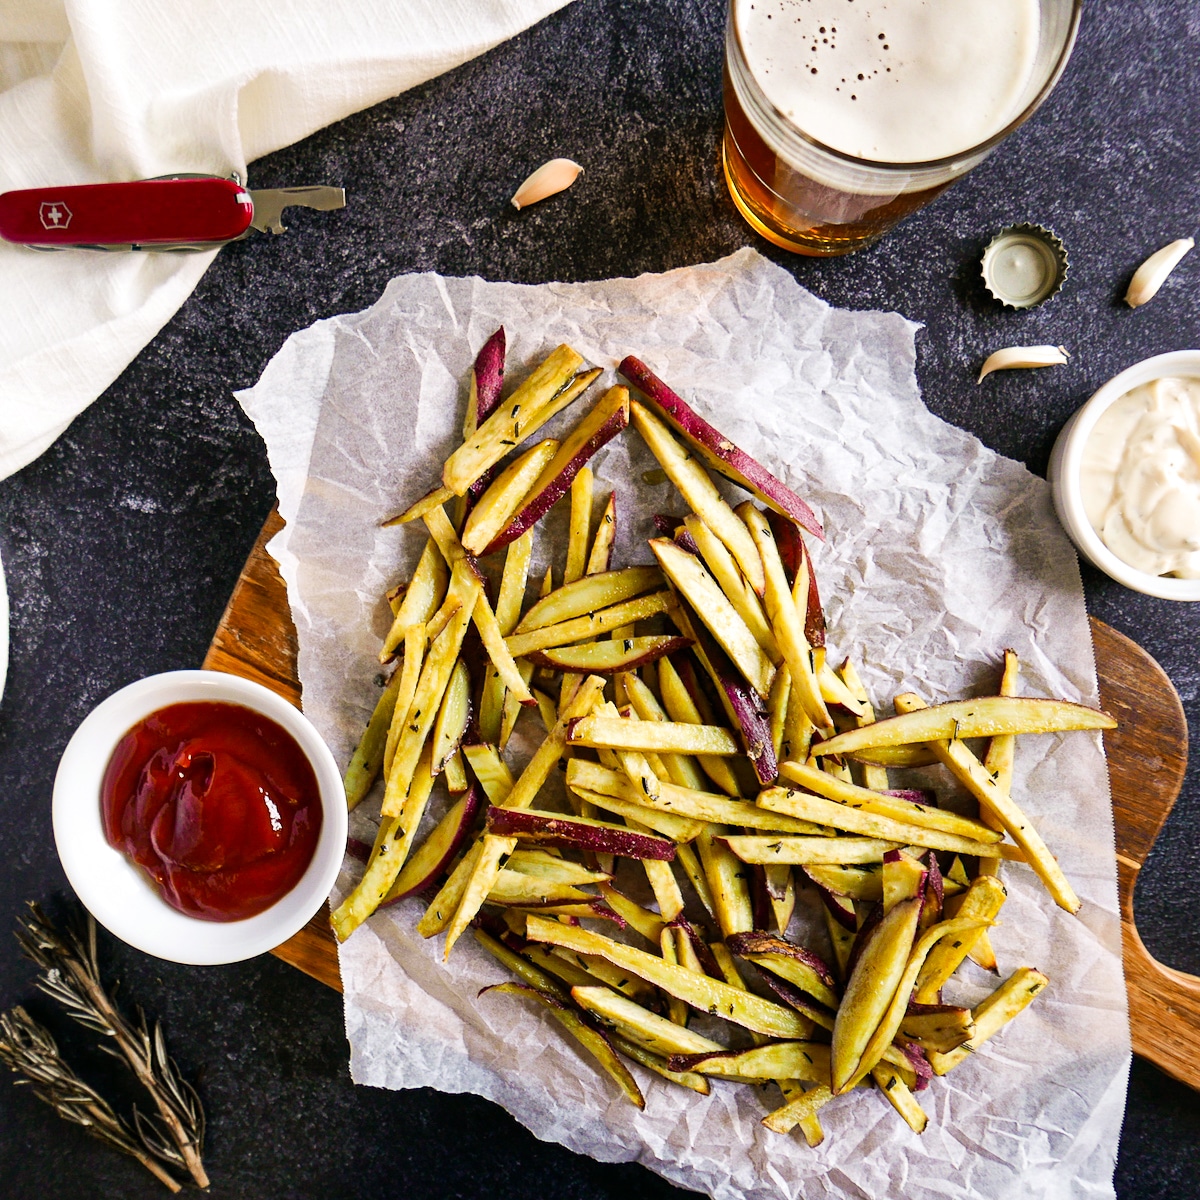 Roasted japanese sweet potato fries on a wooden cutting board with beer and condiments.